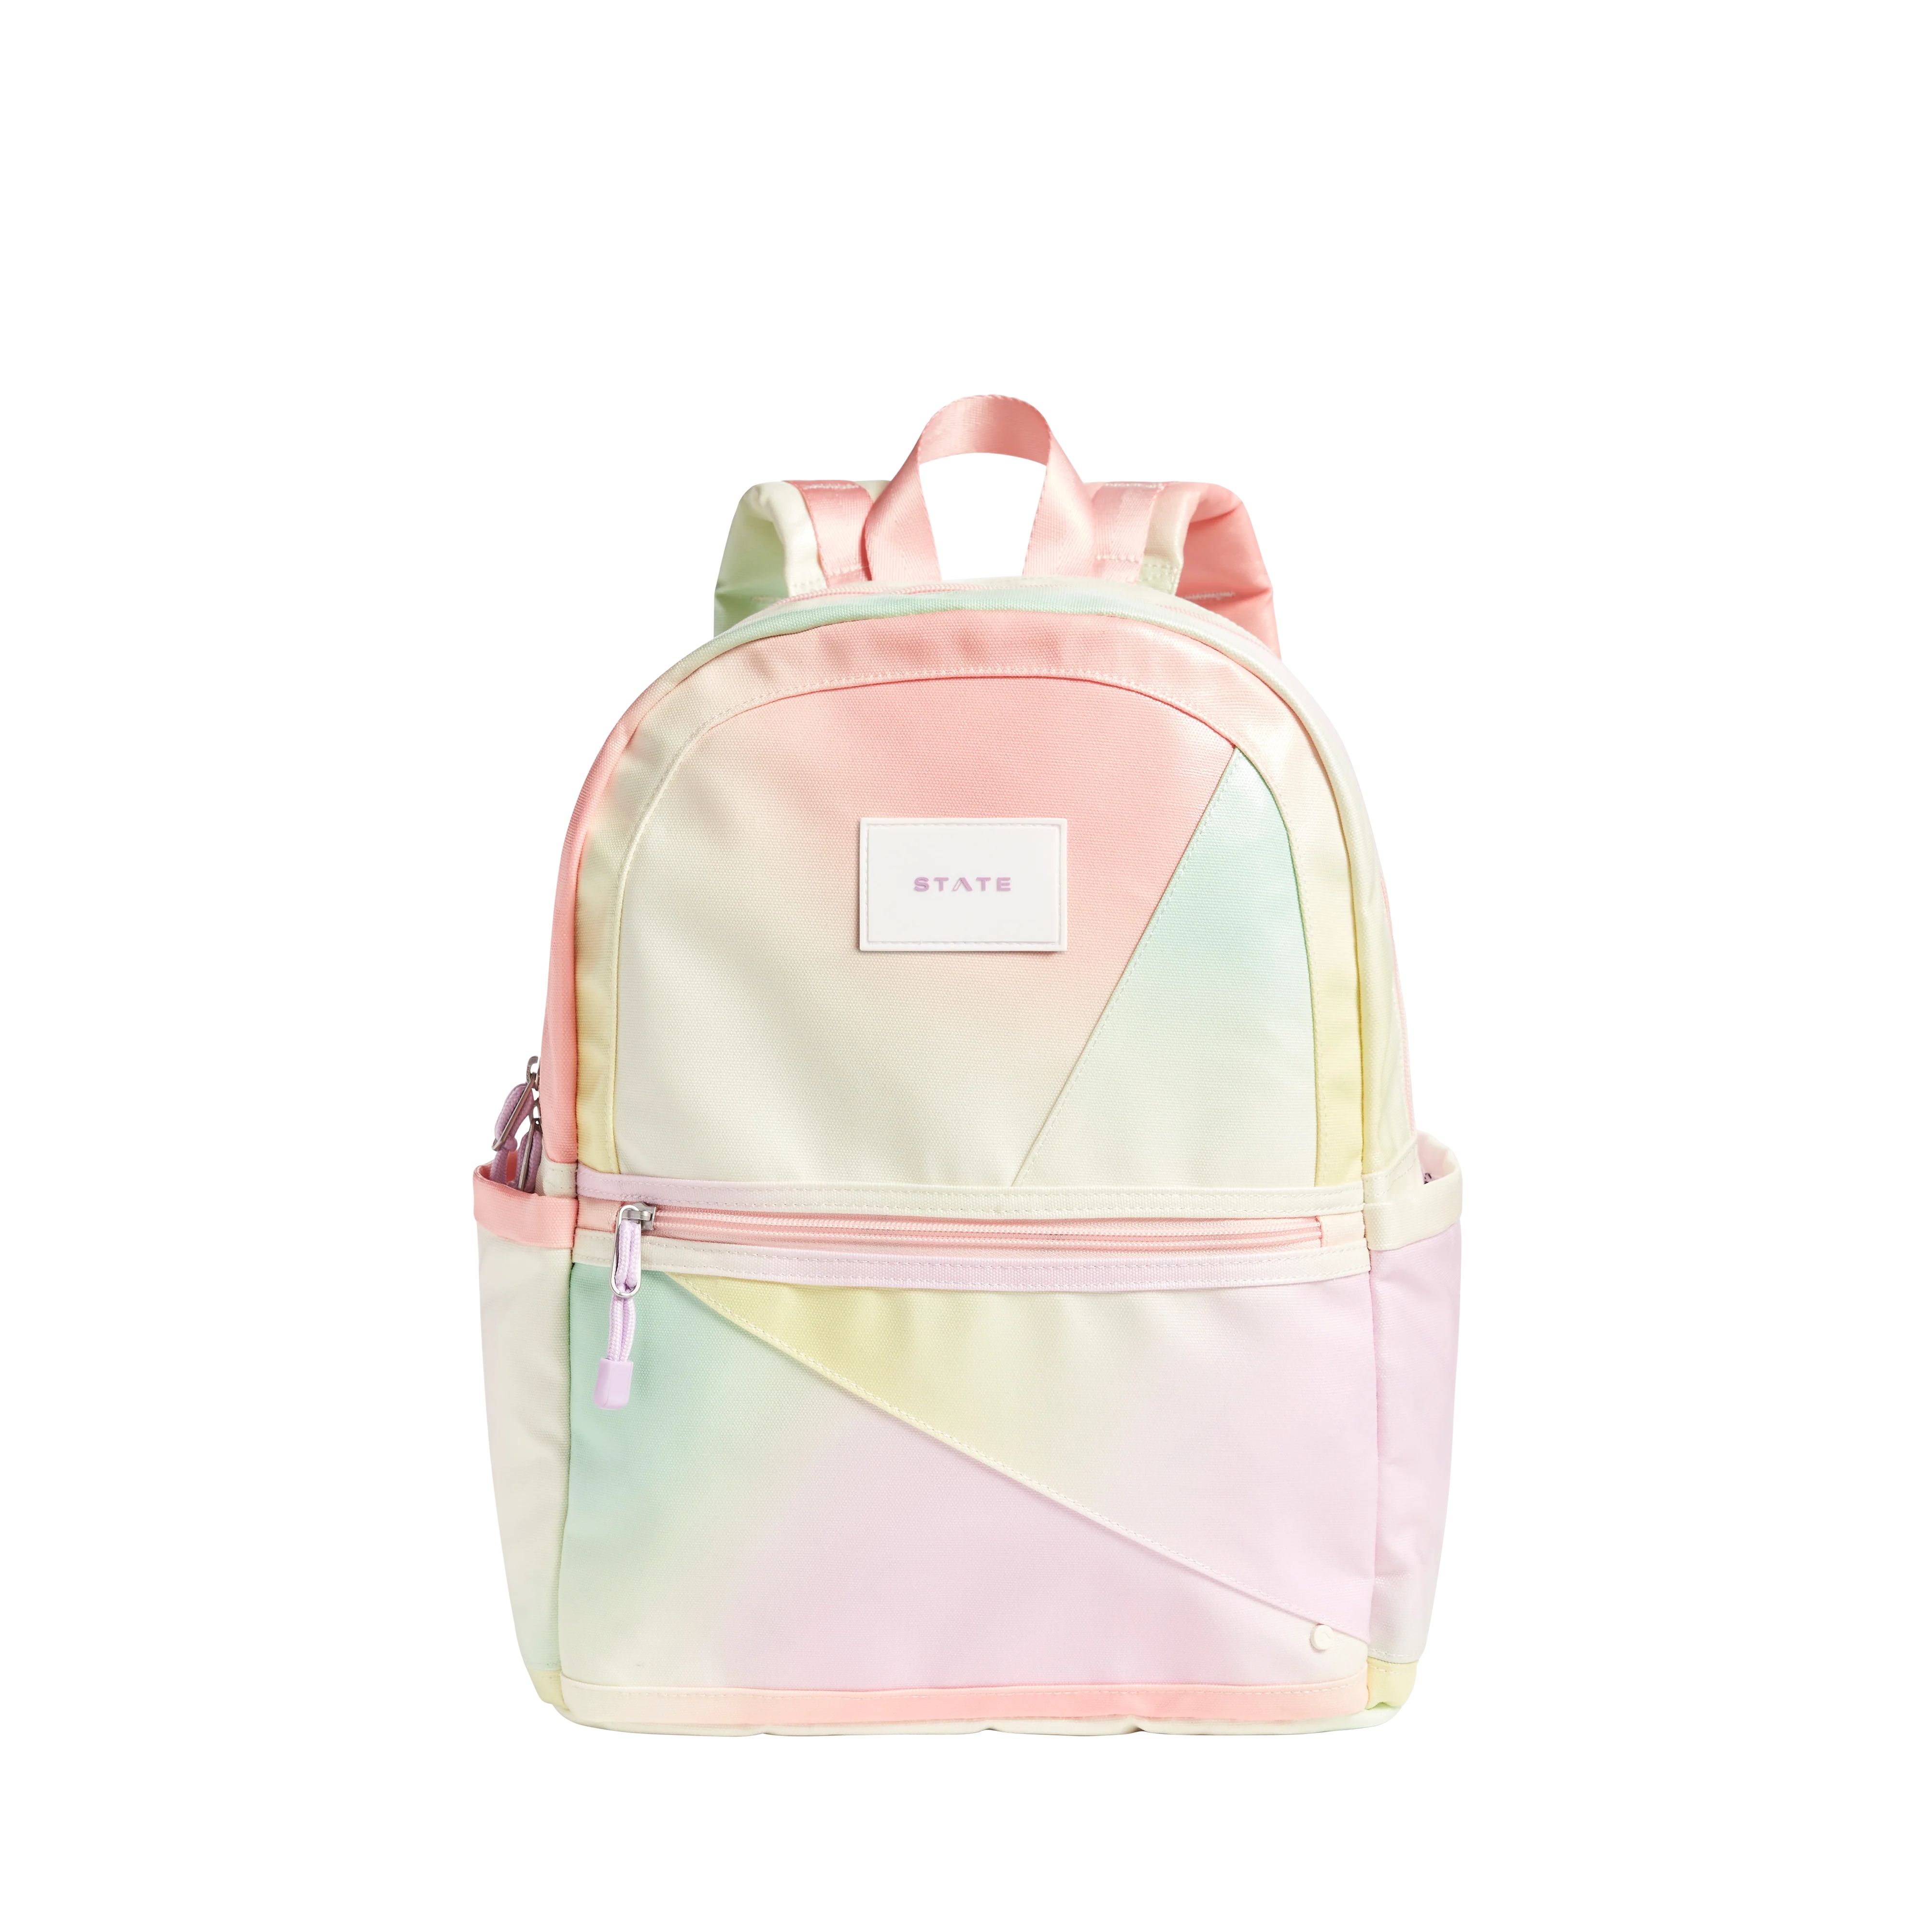 STATE Bags | Kane Kids Double Pocket Backpack Metallic Tie Dye Patchwork | STATE Bags